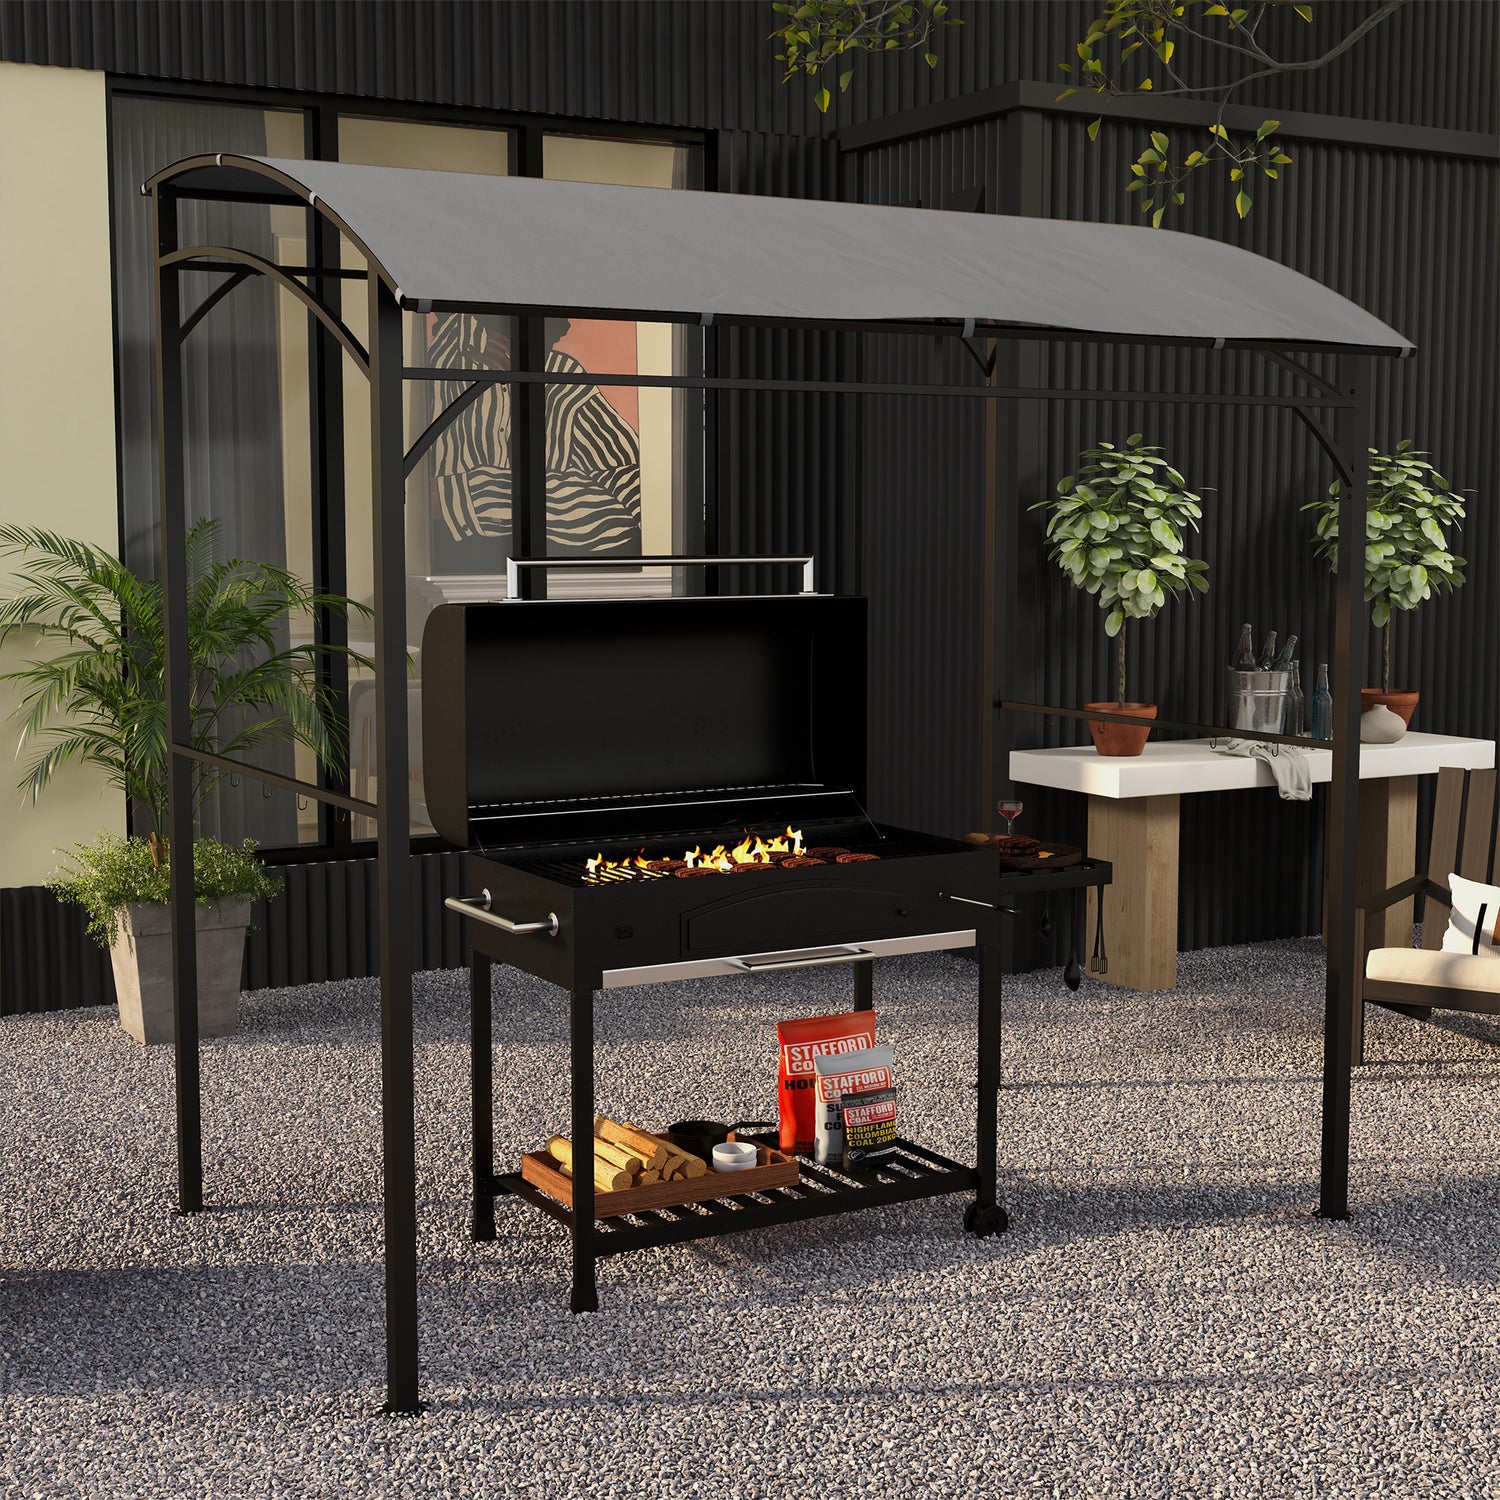 2.2 x 1.5 m BBQ Grill Gazebo Tent, Garden Grill with Metal Frame, Curved Canopy and 10 Hooks, Outdoor Sun Shade, Grey - Gazebo Store